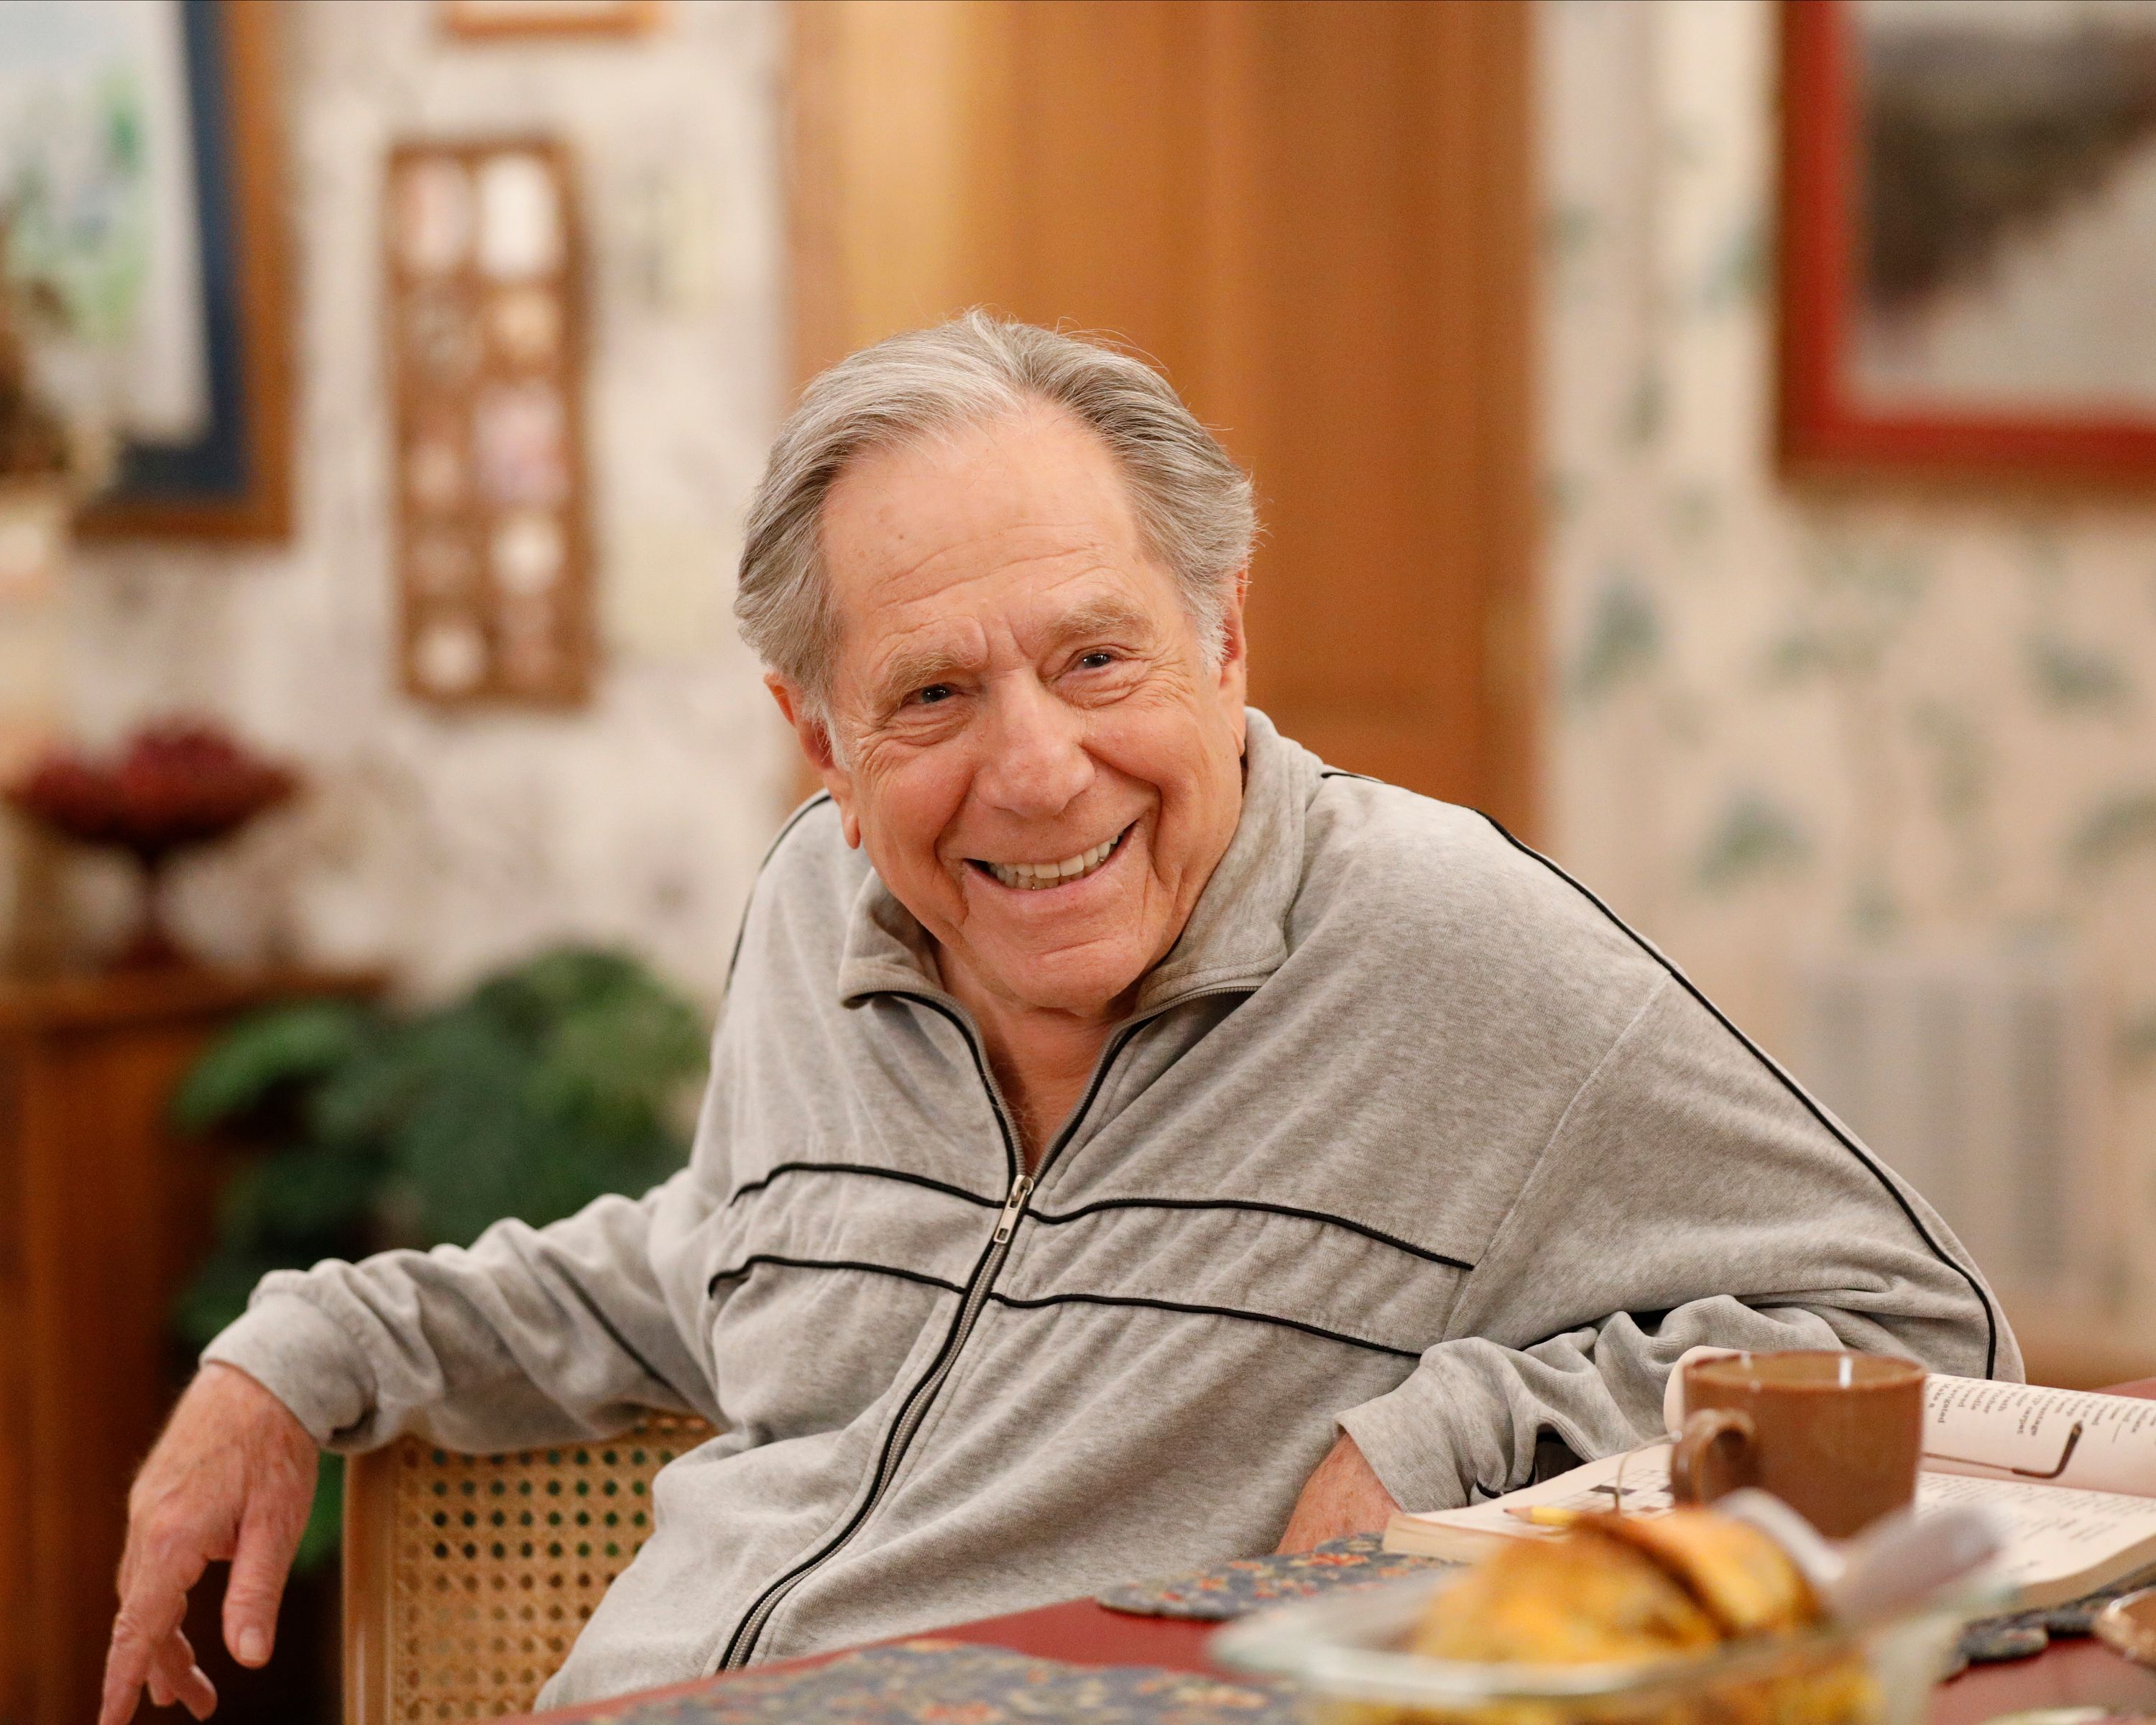 Late actor George Segal during a scene from season 7 of ABC's "The Goldbergs" | Photo: Raymond Liu/ABC via Getty Images